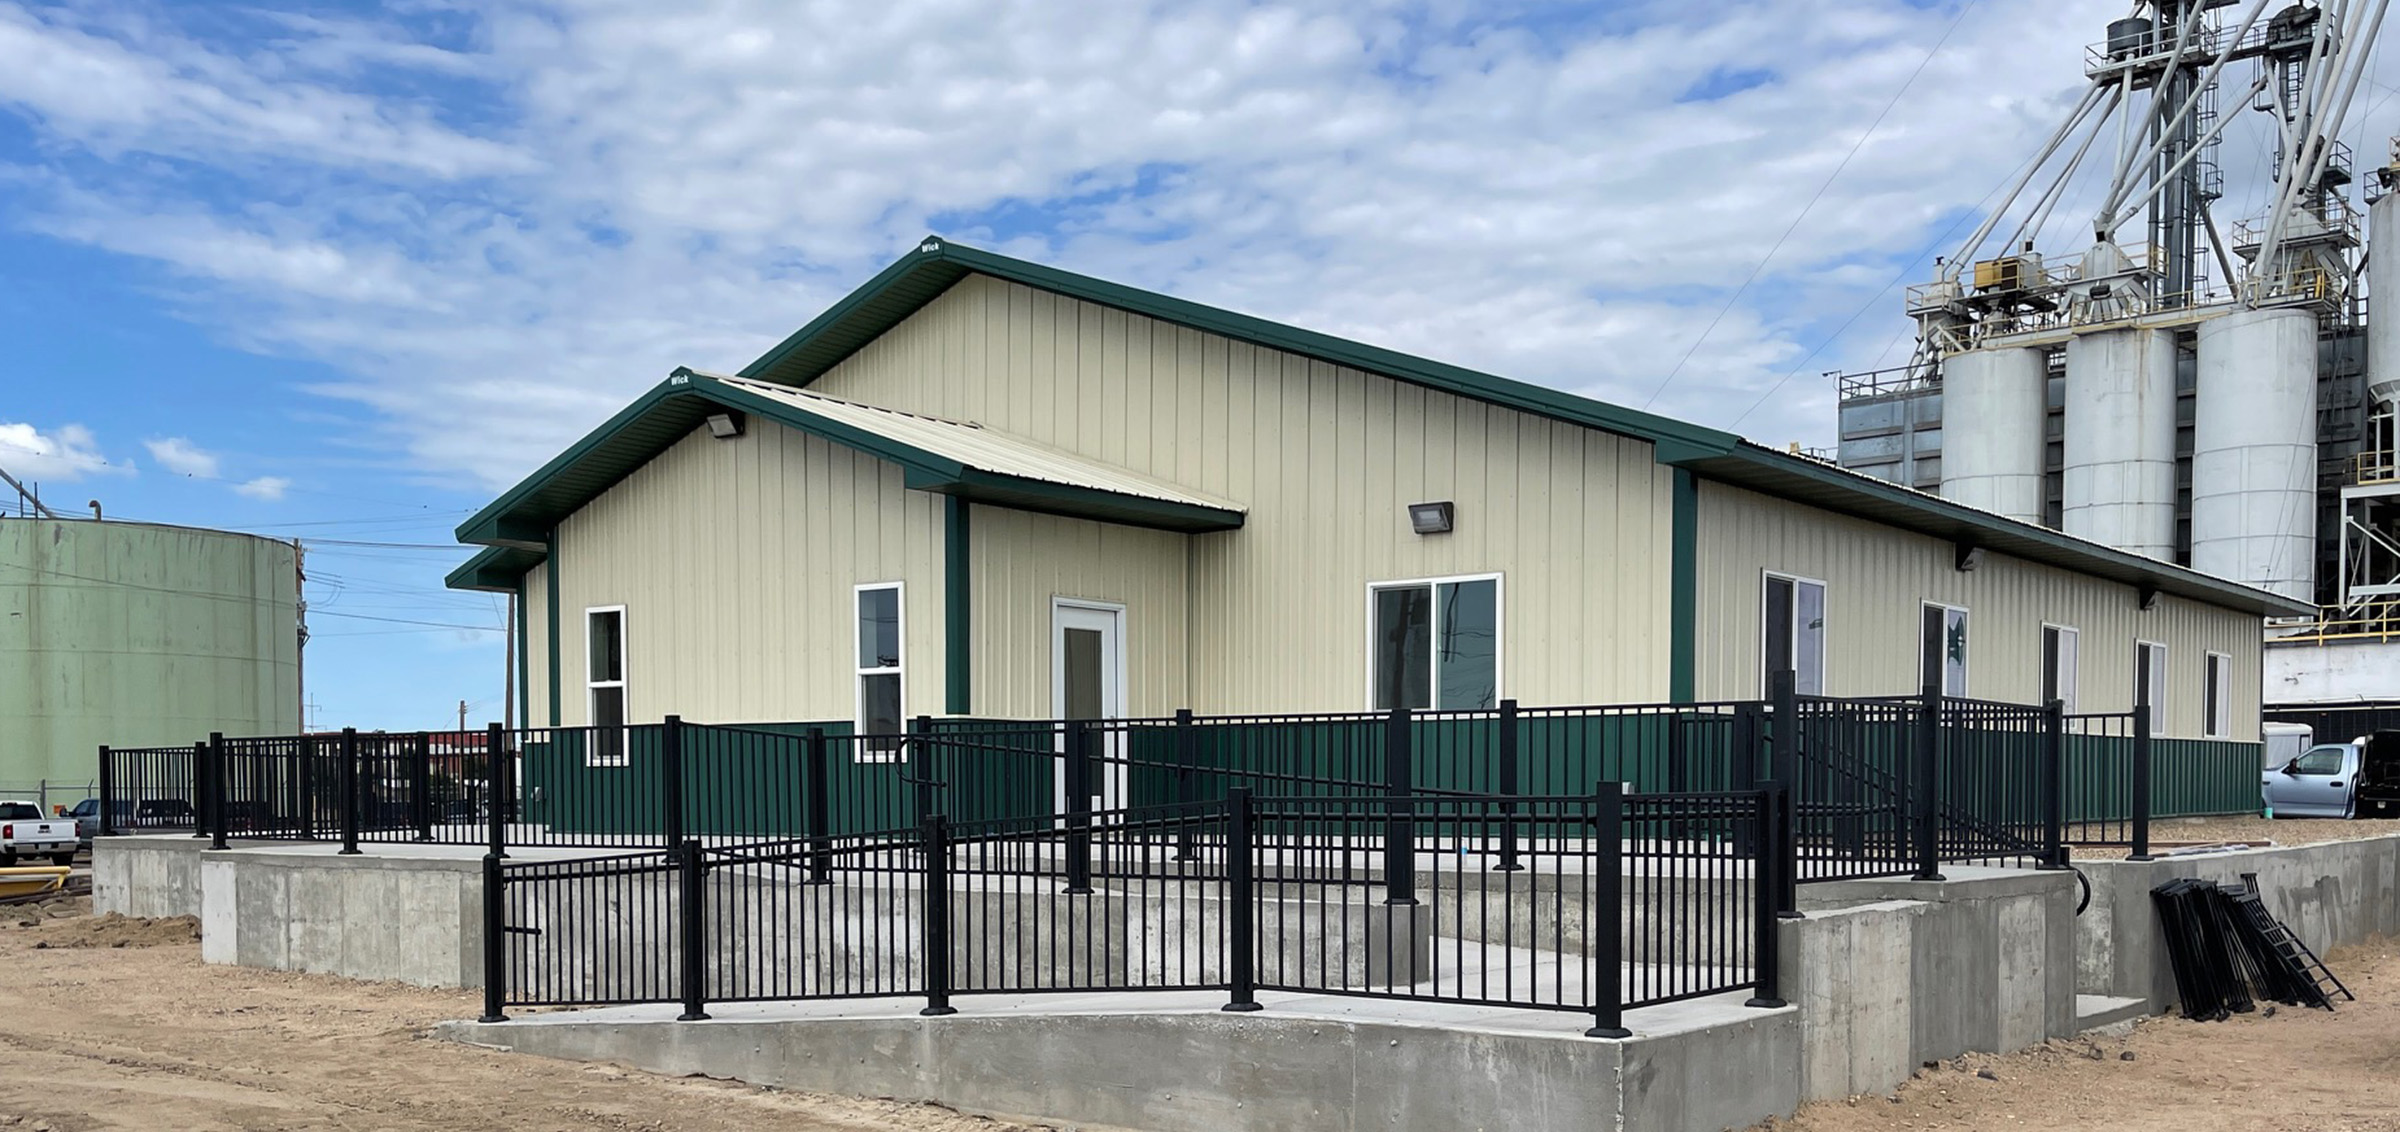 Light yellow and dark green post frame commercial building located in an industrial park